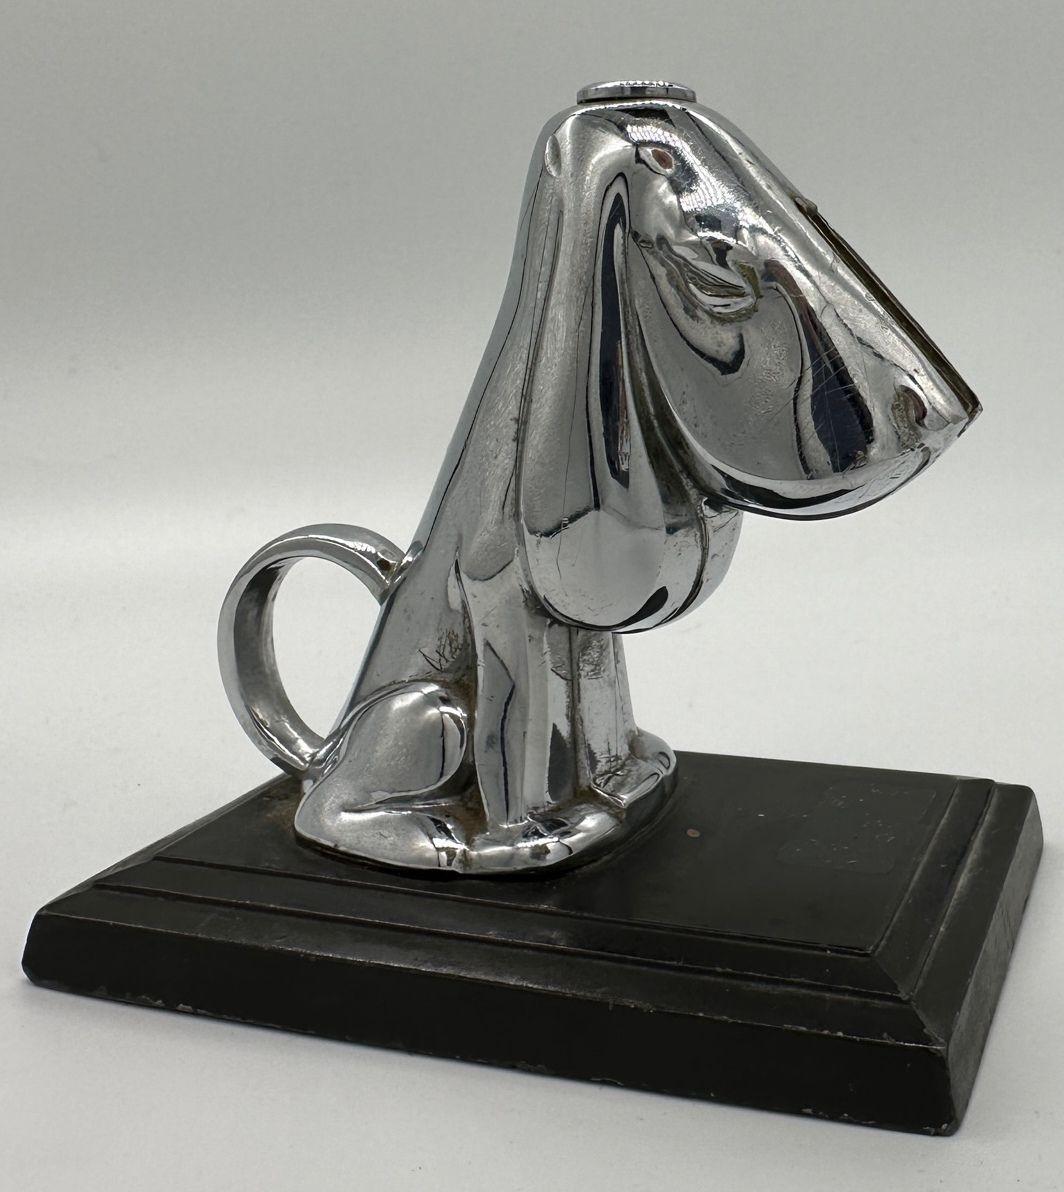 In 1935, a desk-mounted striker lighter was crafted. It featured a basset hound canine adorned with a layer of chromium plate, positioned on a sleek black enameled metal base. The tail of the hound was ingeniously shaped into a small handle. This